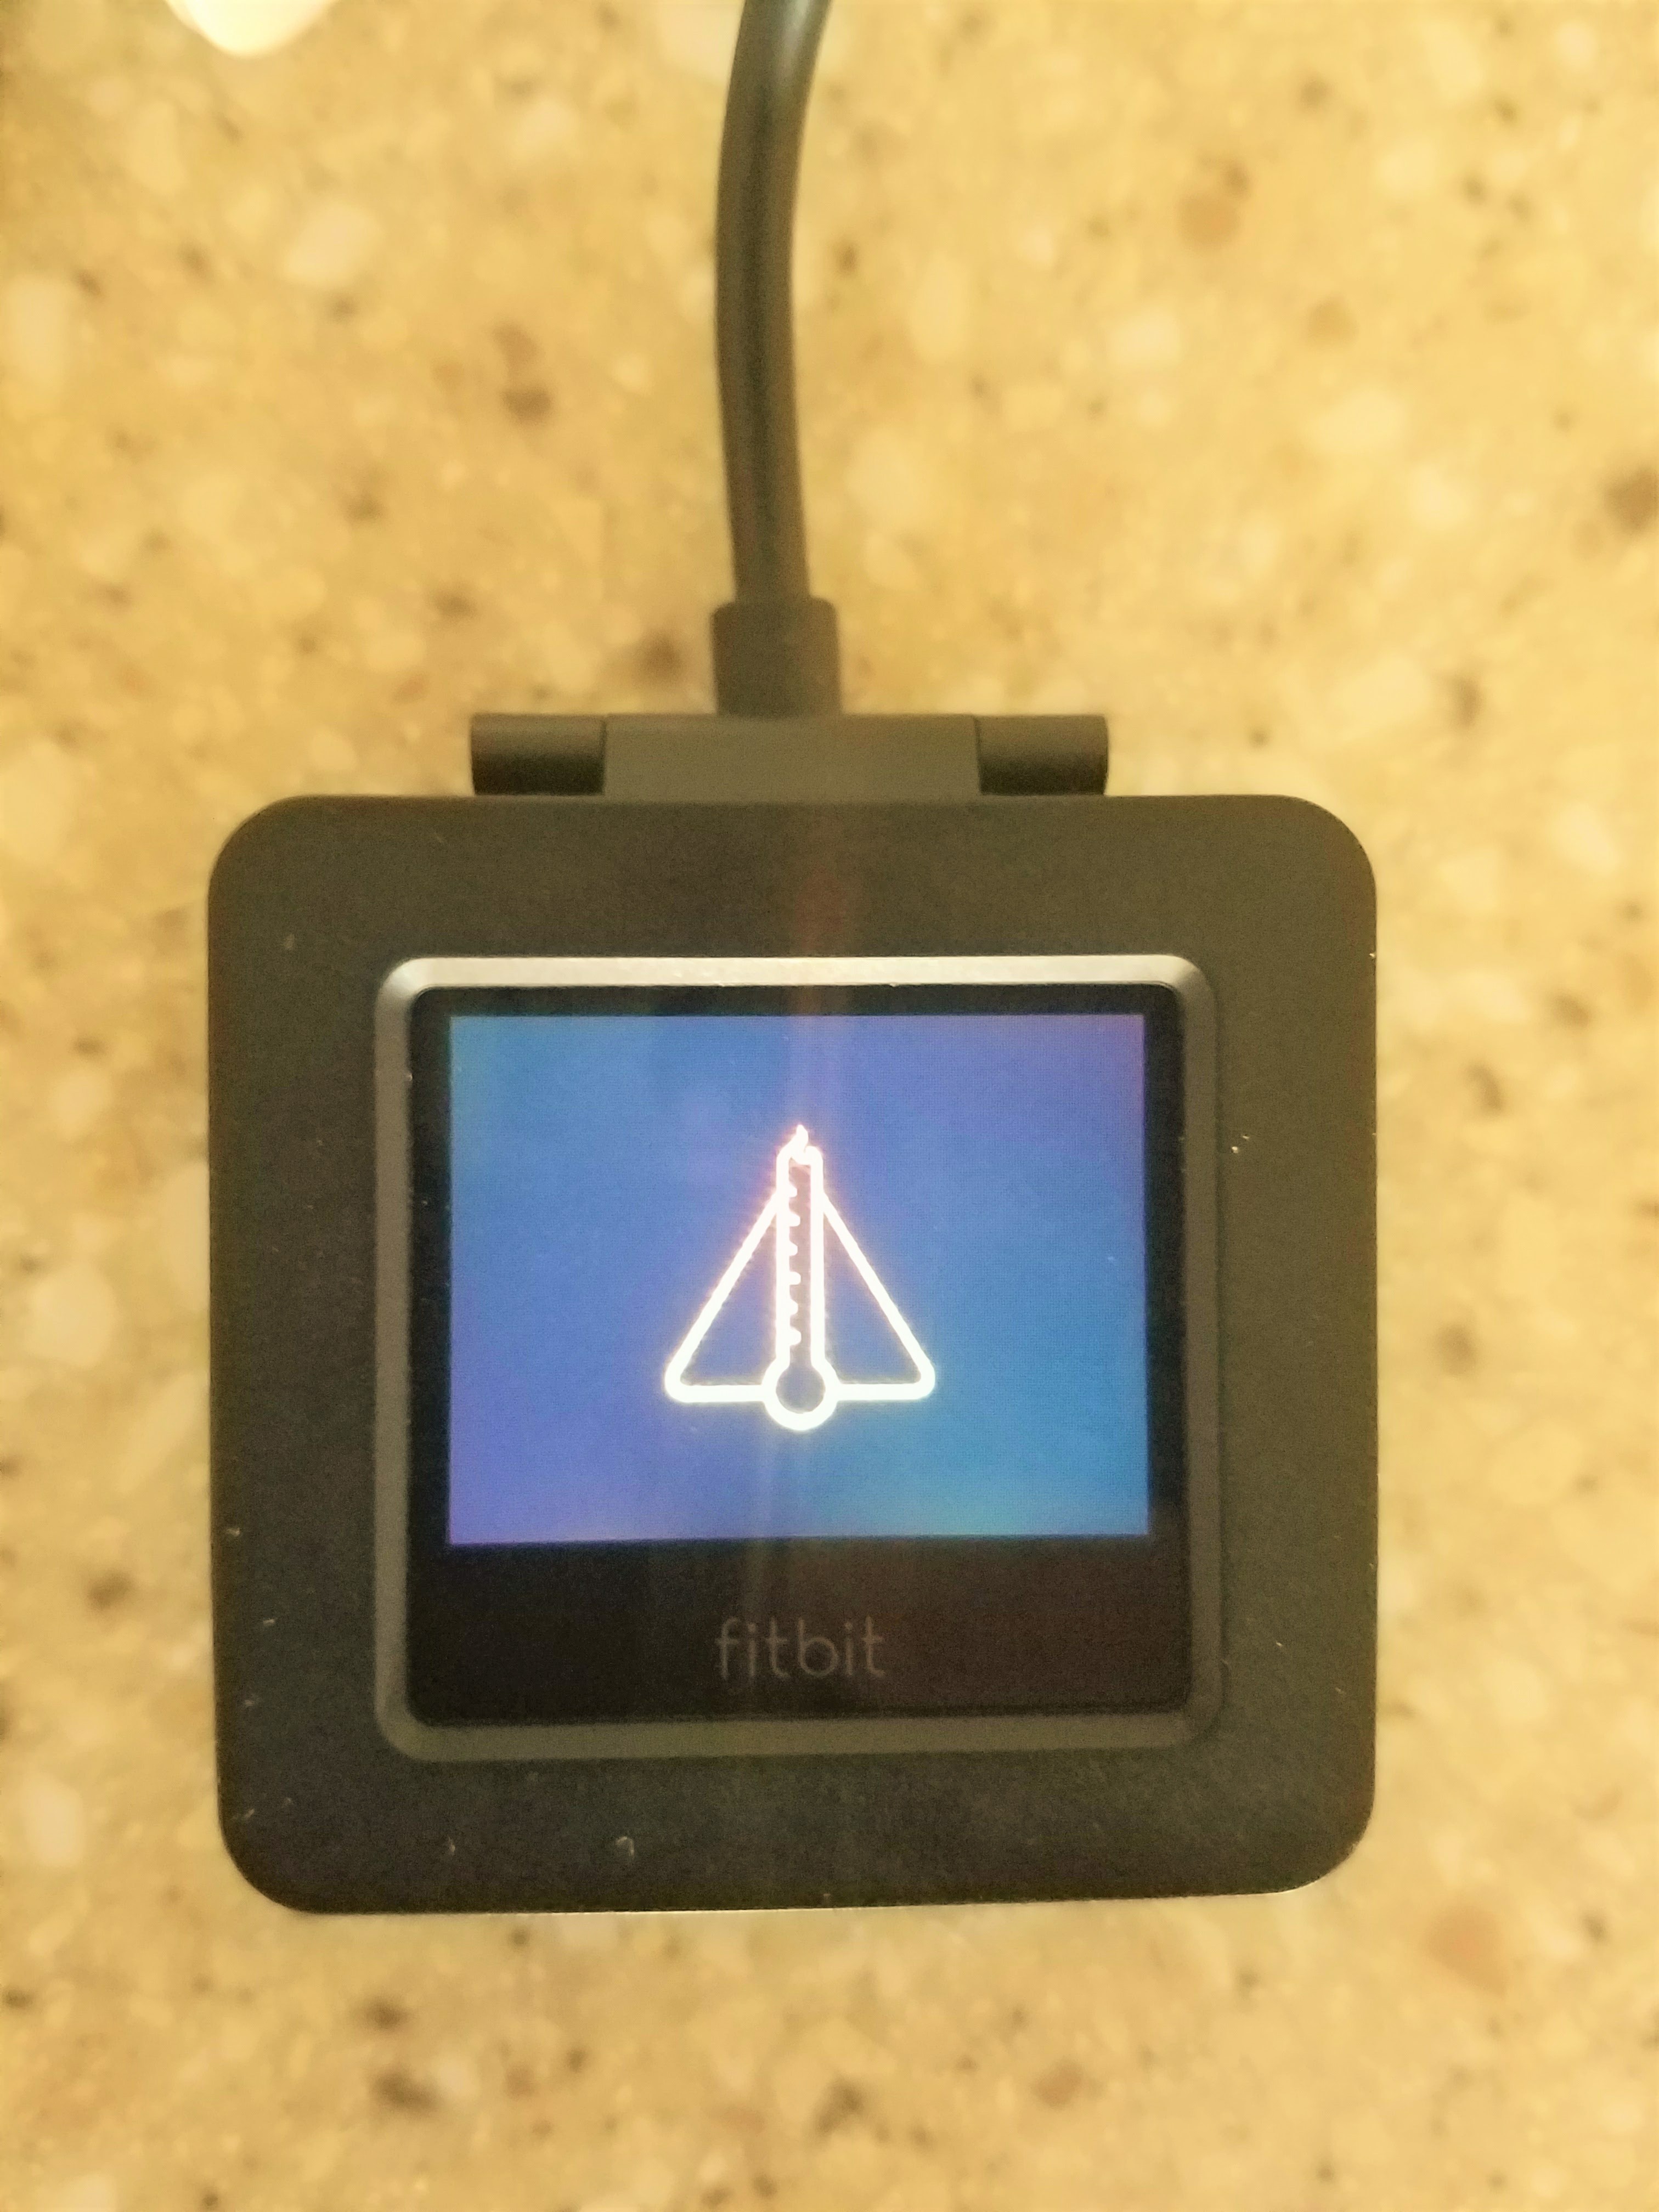 Solved: Fitbit Blaze overheating and no 